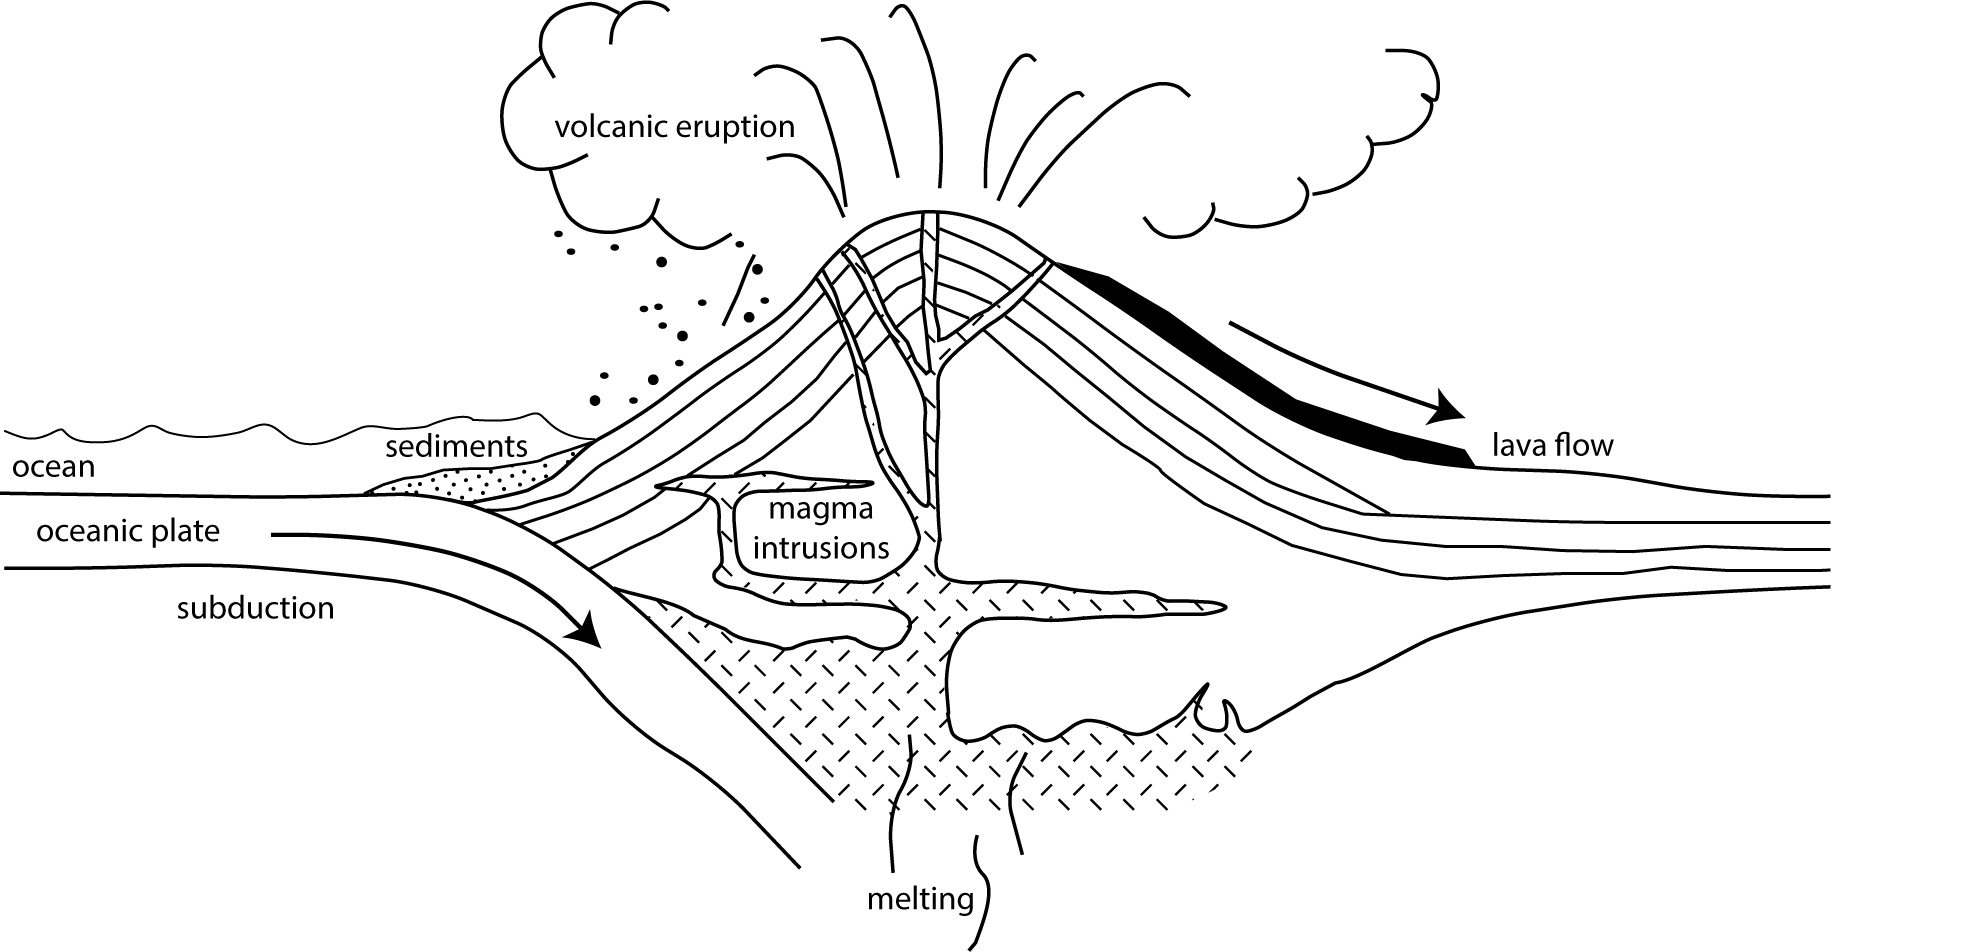 Schematic diagram illustrating subduction of crustal plates and associated volcanism.